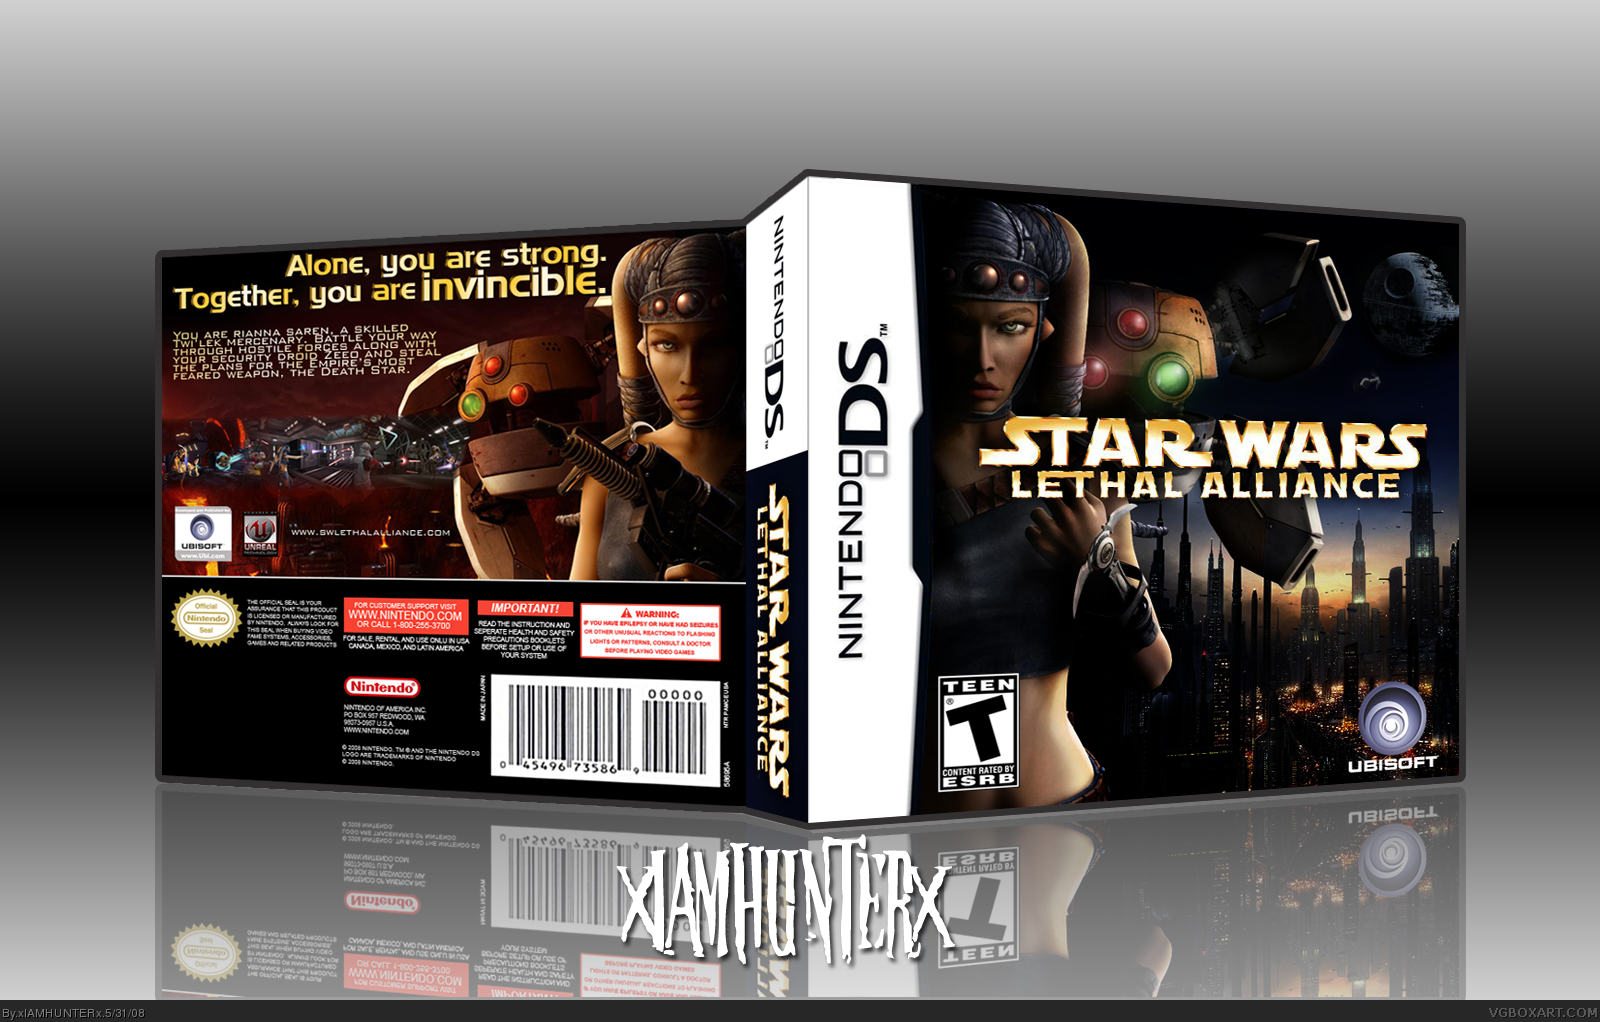 Star Wars: Lethal Alliance box cover